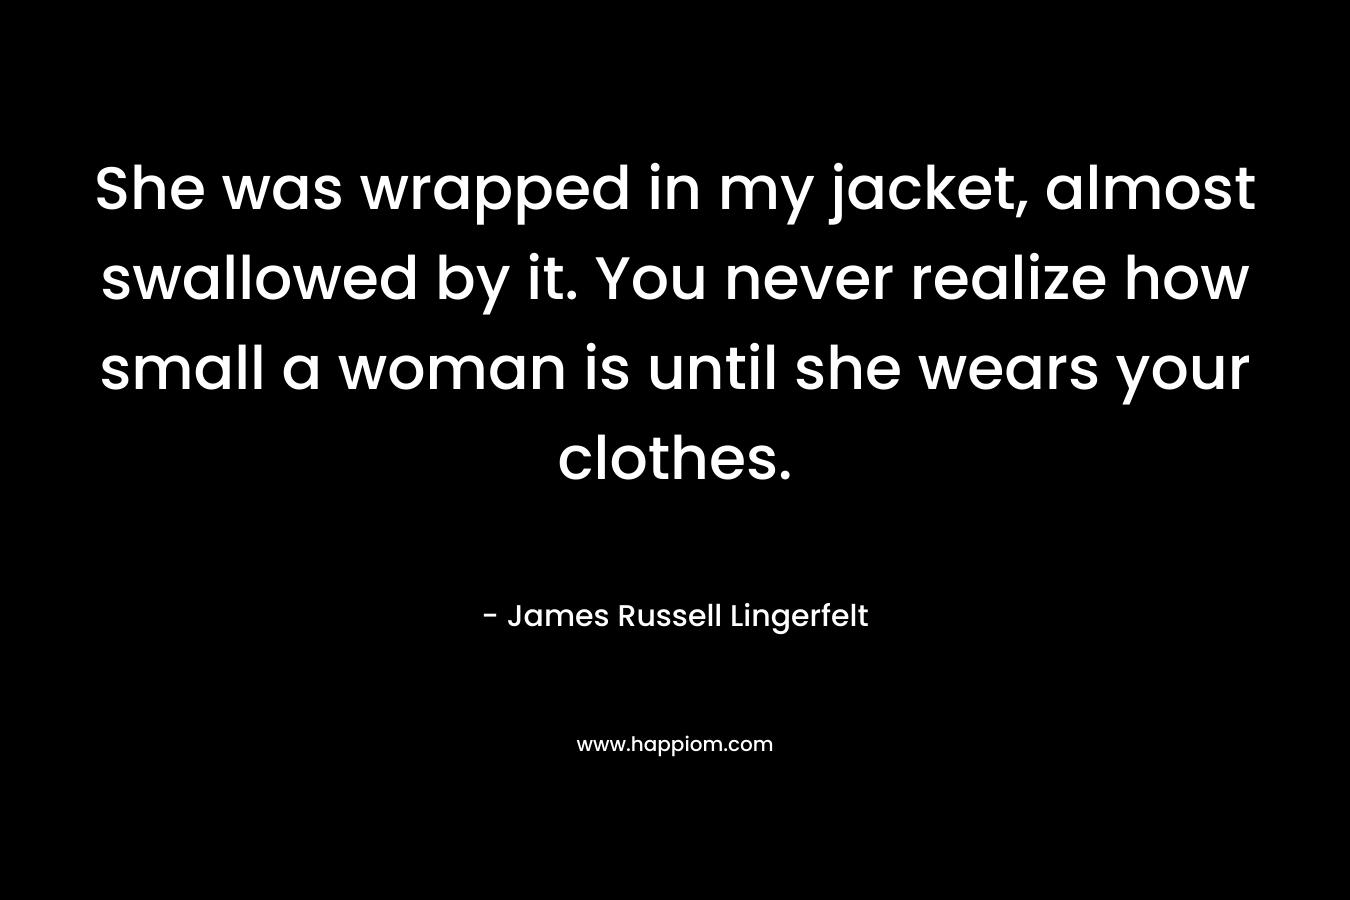 She was wrapped in my jacket, almost swallowed by it. You never realize how small a woman is until she wears your clothes. – James Russell Lingerfelt